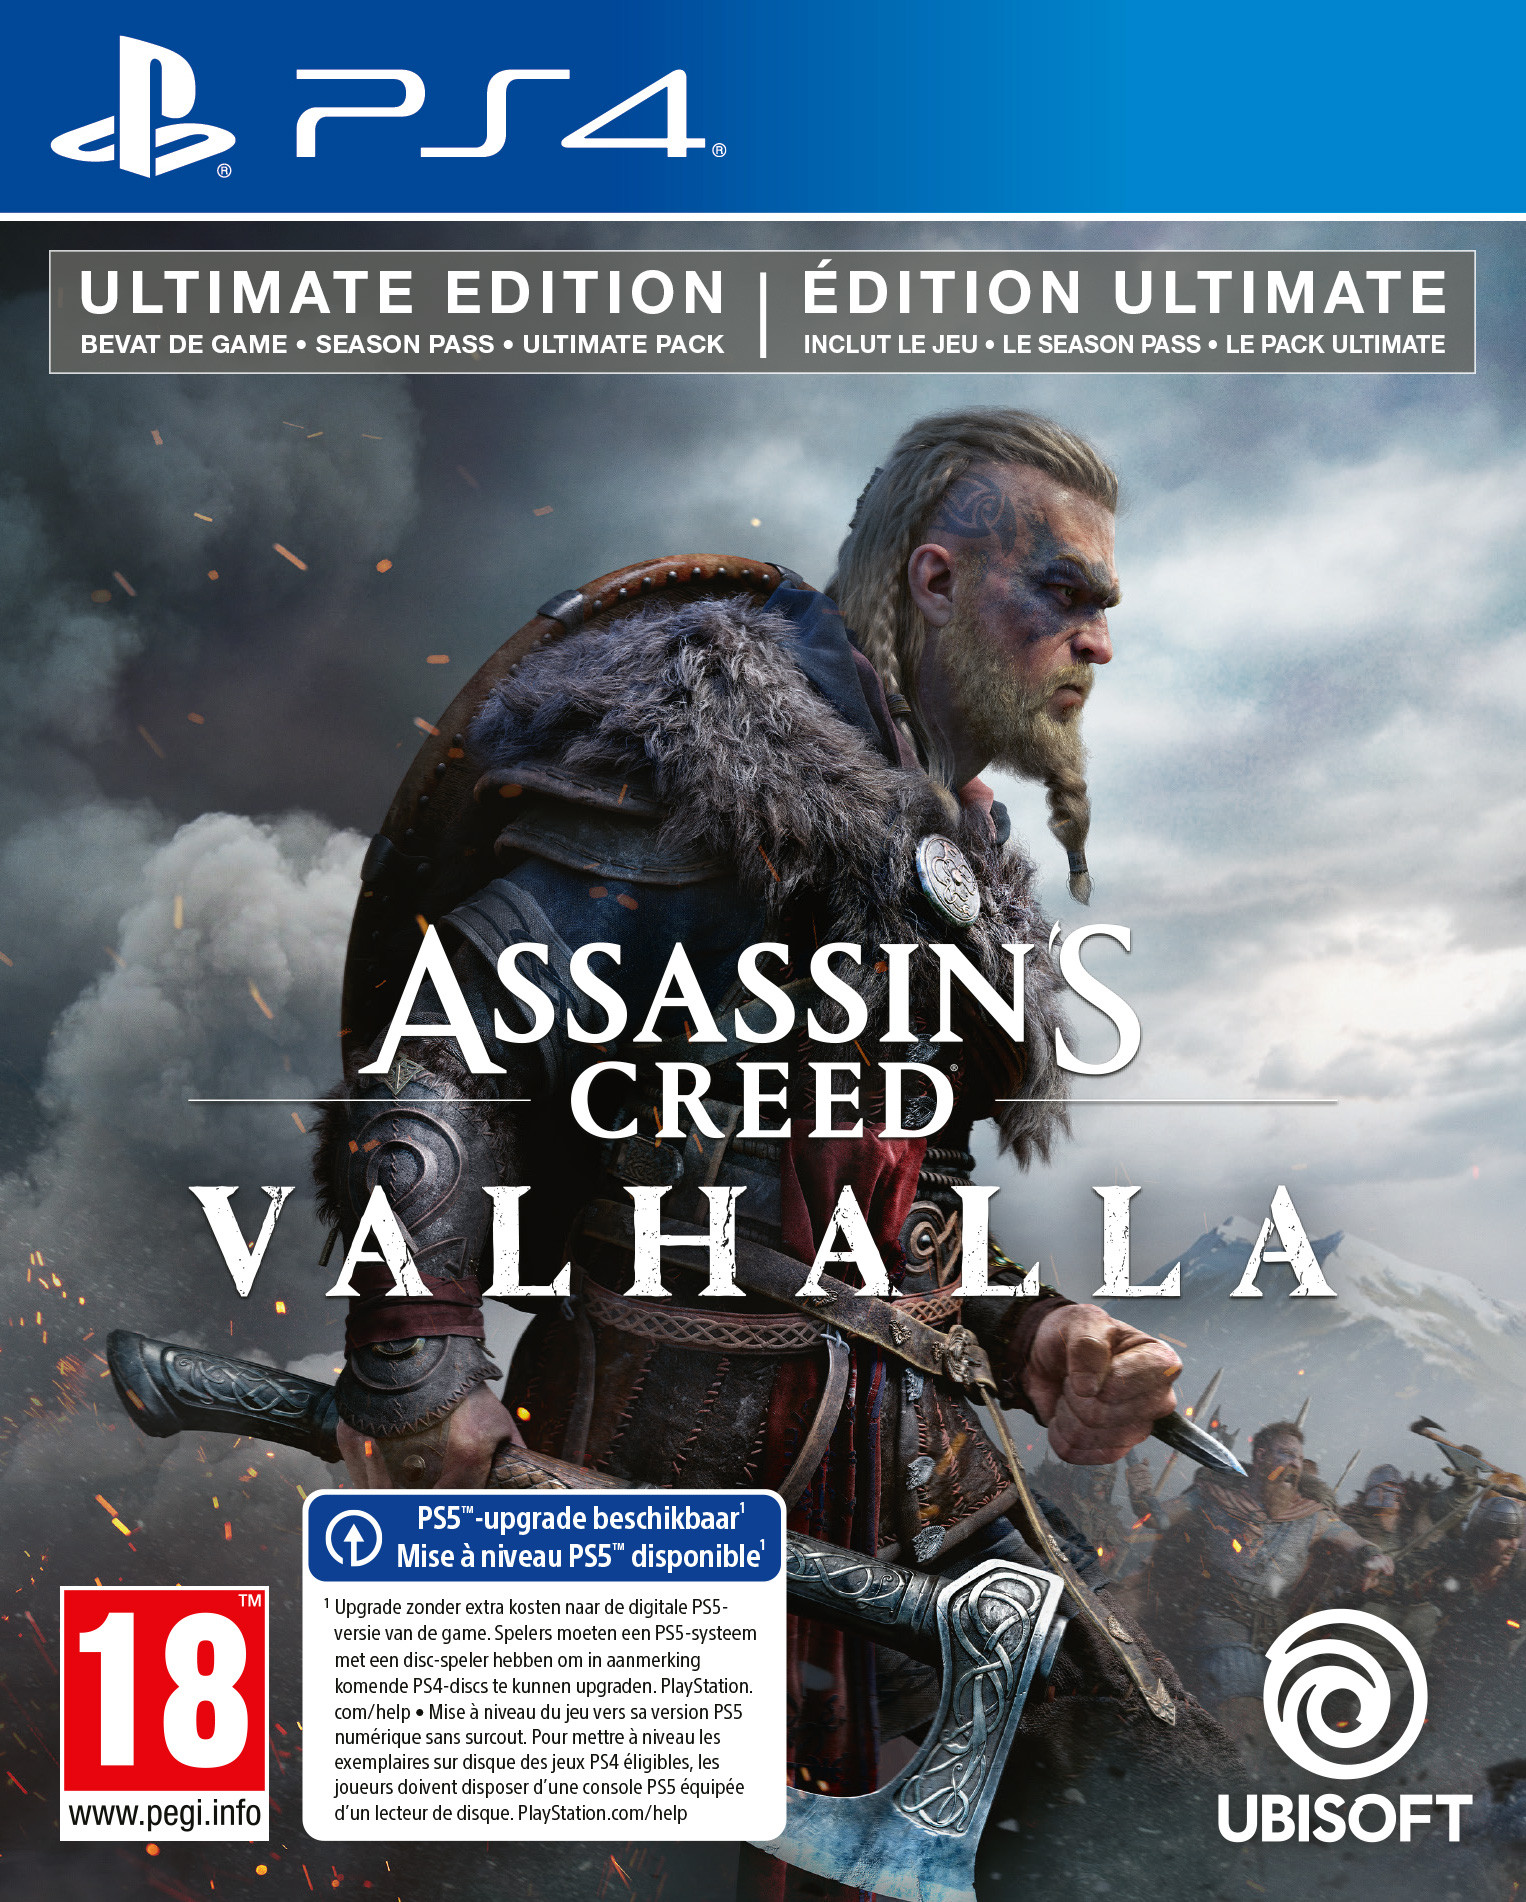 Assassin's Creed Valhalla Ultimate Edition